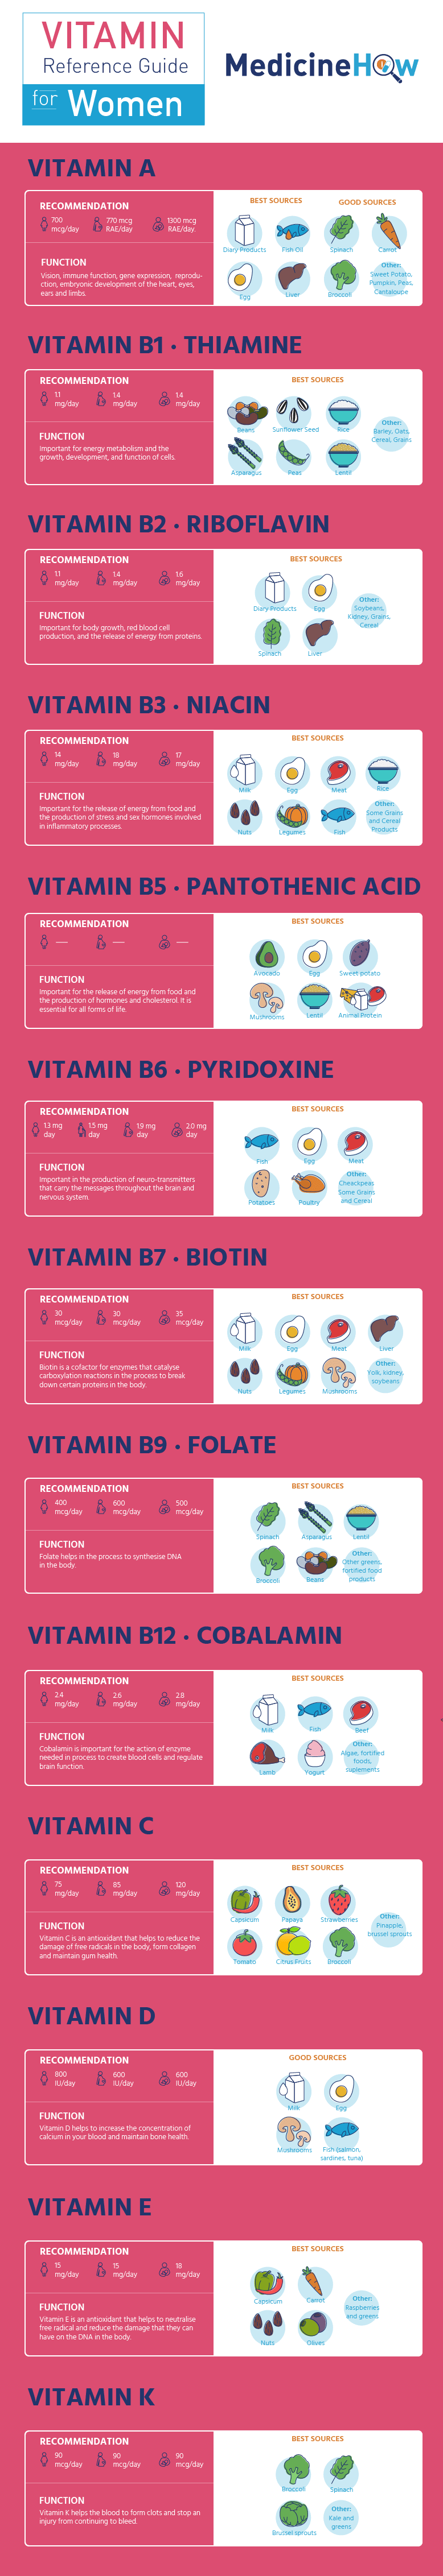 vitamin-reference-guide-for-women-infographic